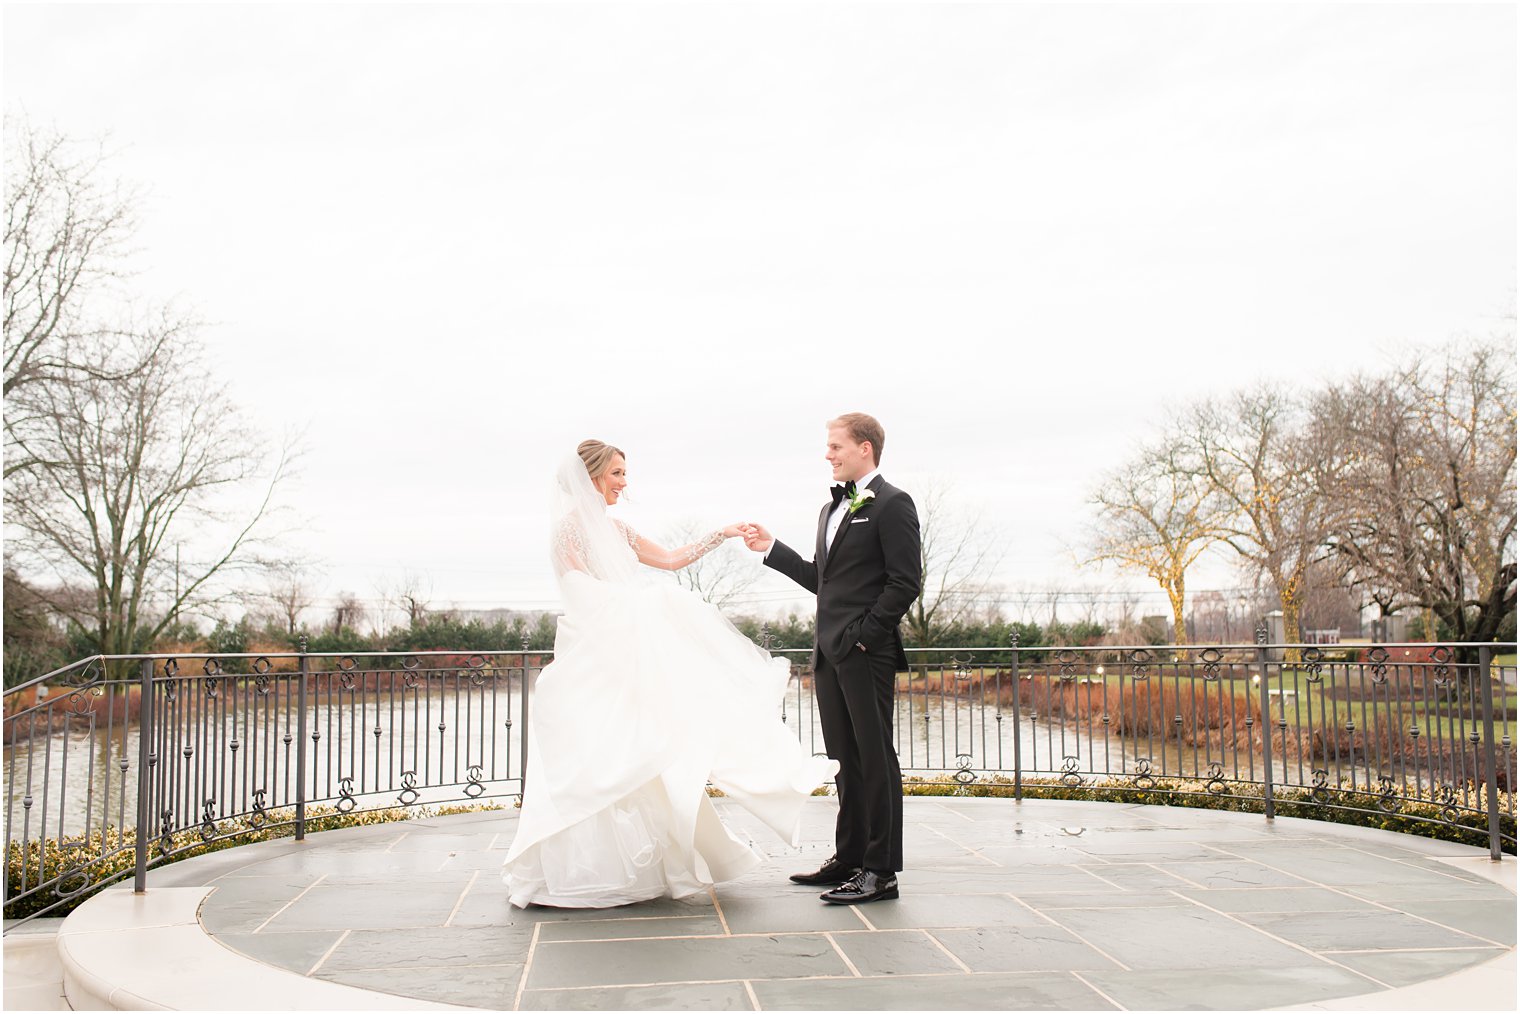 Groom twirling bride at Winter wedding at Park Chateau Estate and Gardens